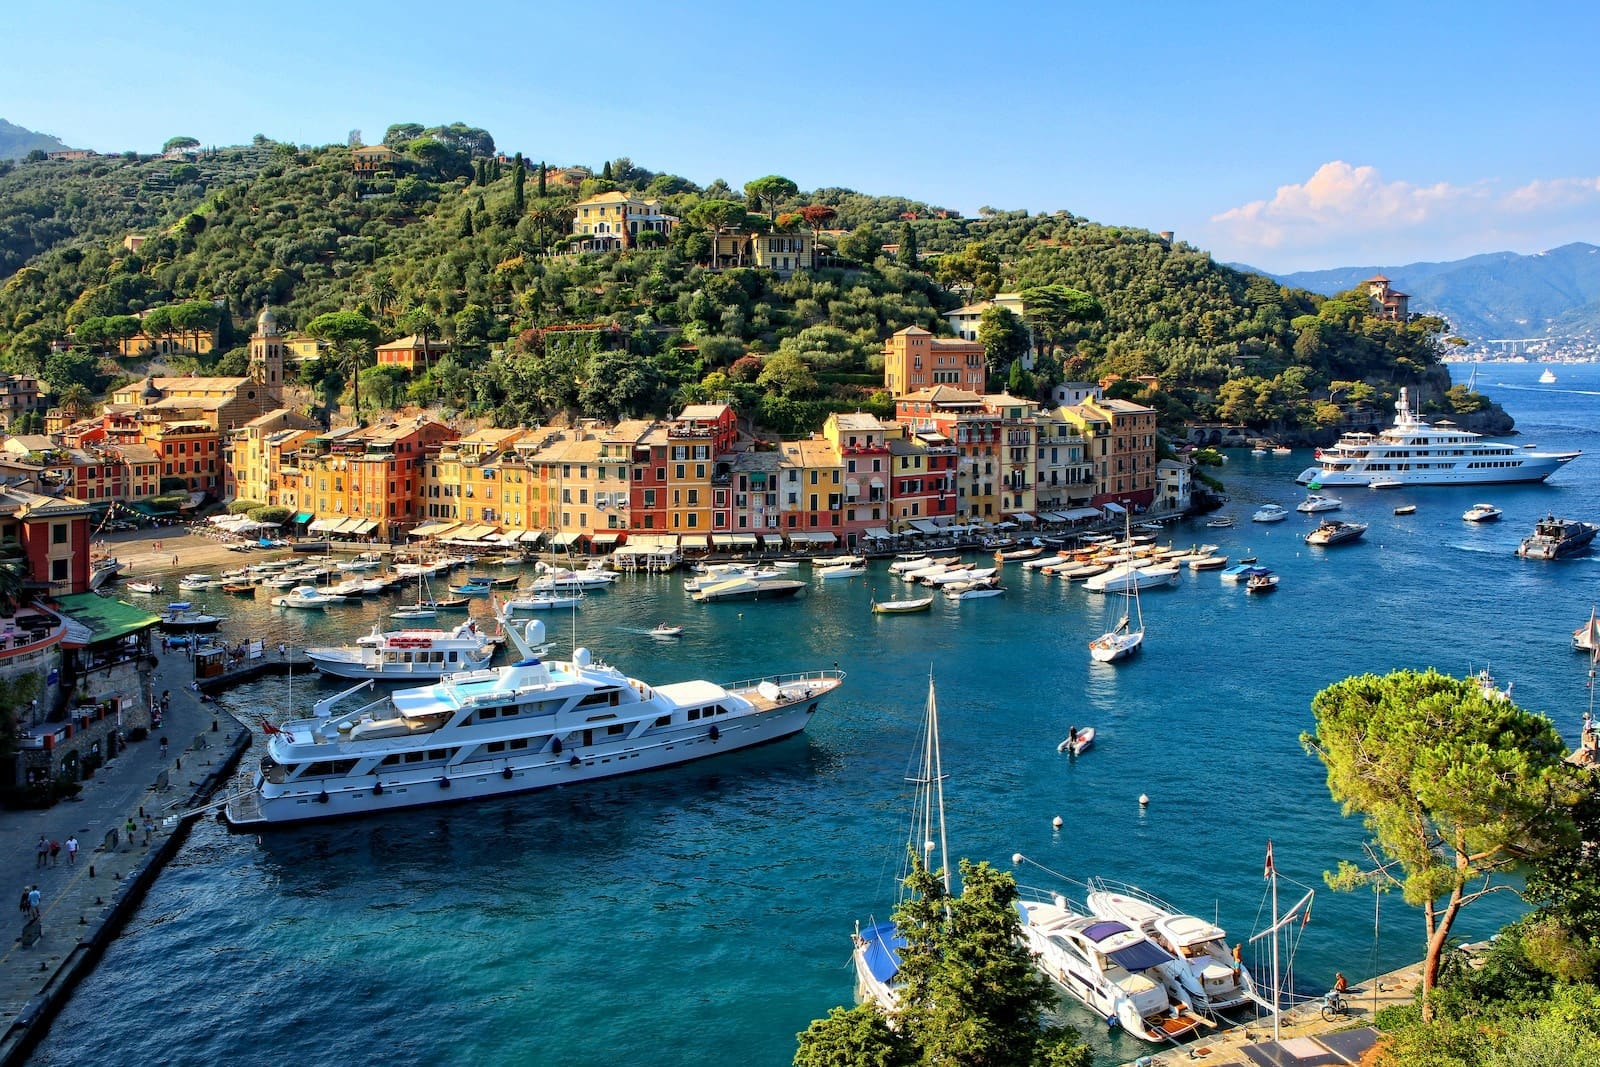 Top 10 things to do and see in Portofino, Italy – travel guide 2023